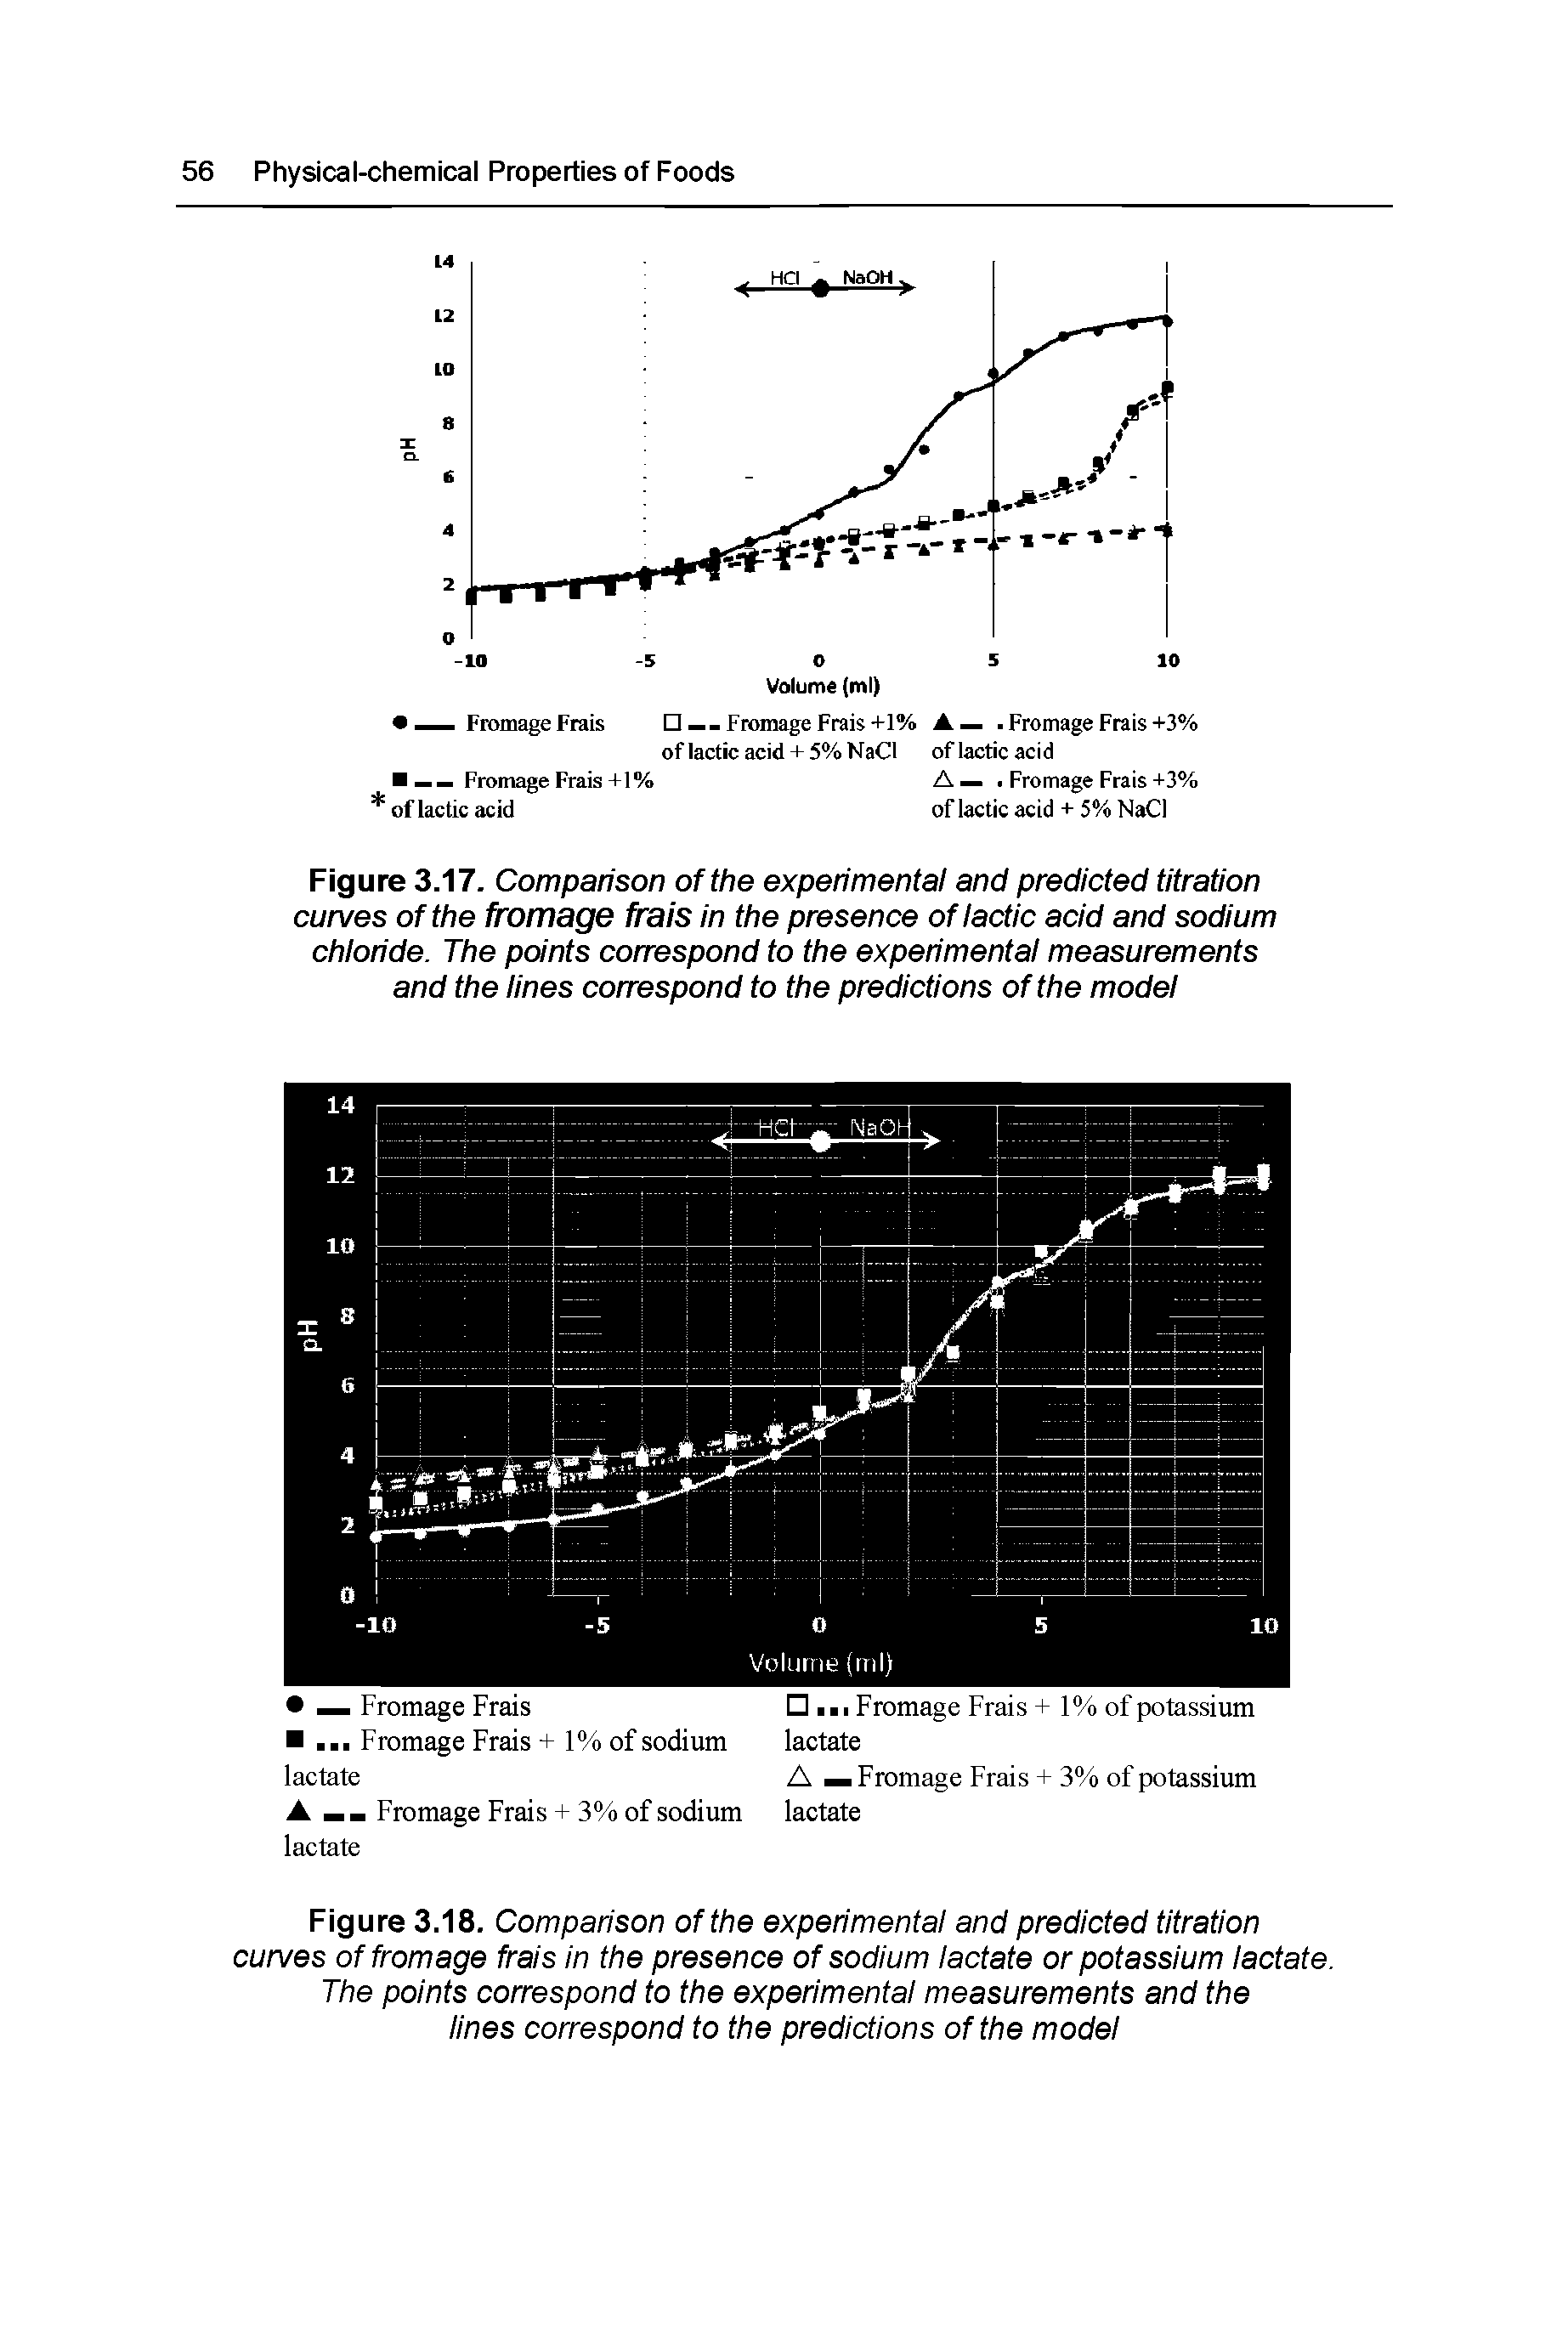 Figure 3.17. Comparison of the experimental and predicted titration curves of the fromage frais in the presence of lactic acid and sodium chloride. The points correspond to the experimental measurements and the lines correspond to the predictions of the model...